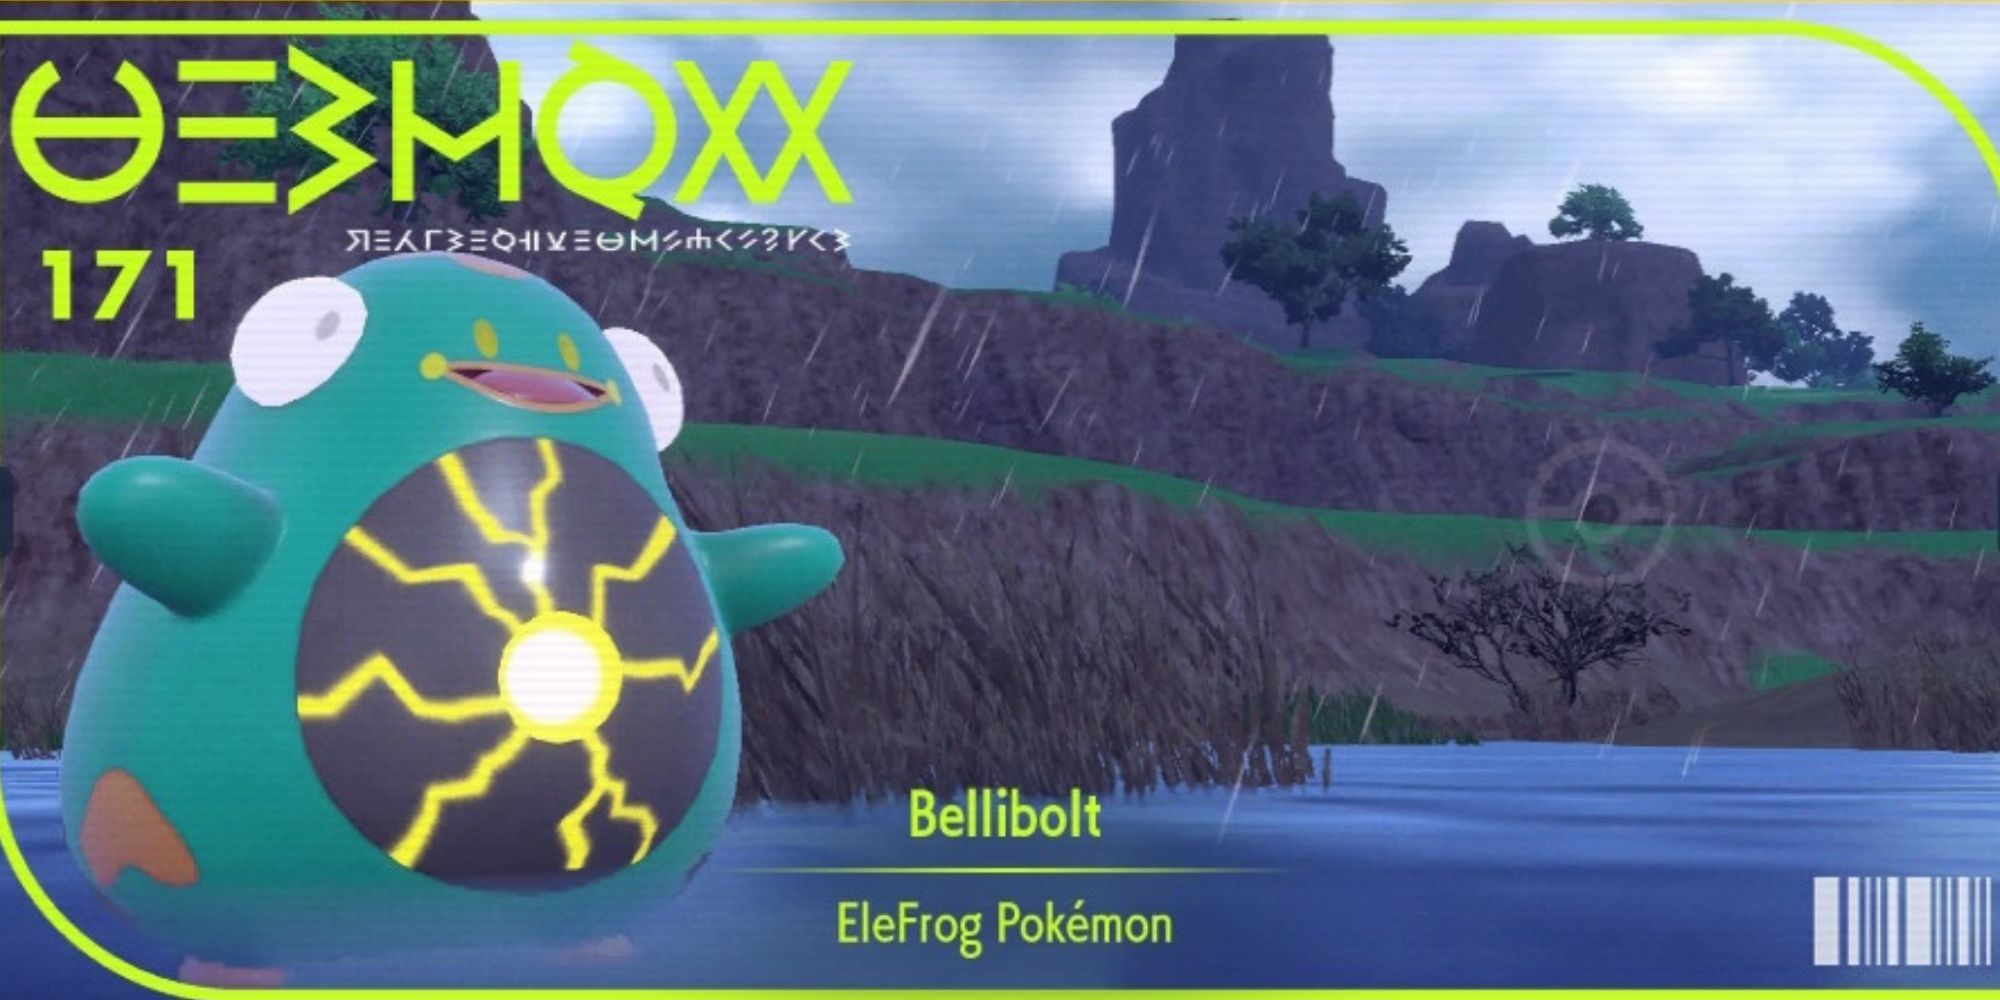 The Pokedex cover of Bellibolt from Pokemon Scarlet and Violet